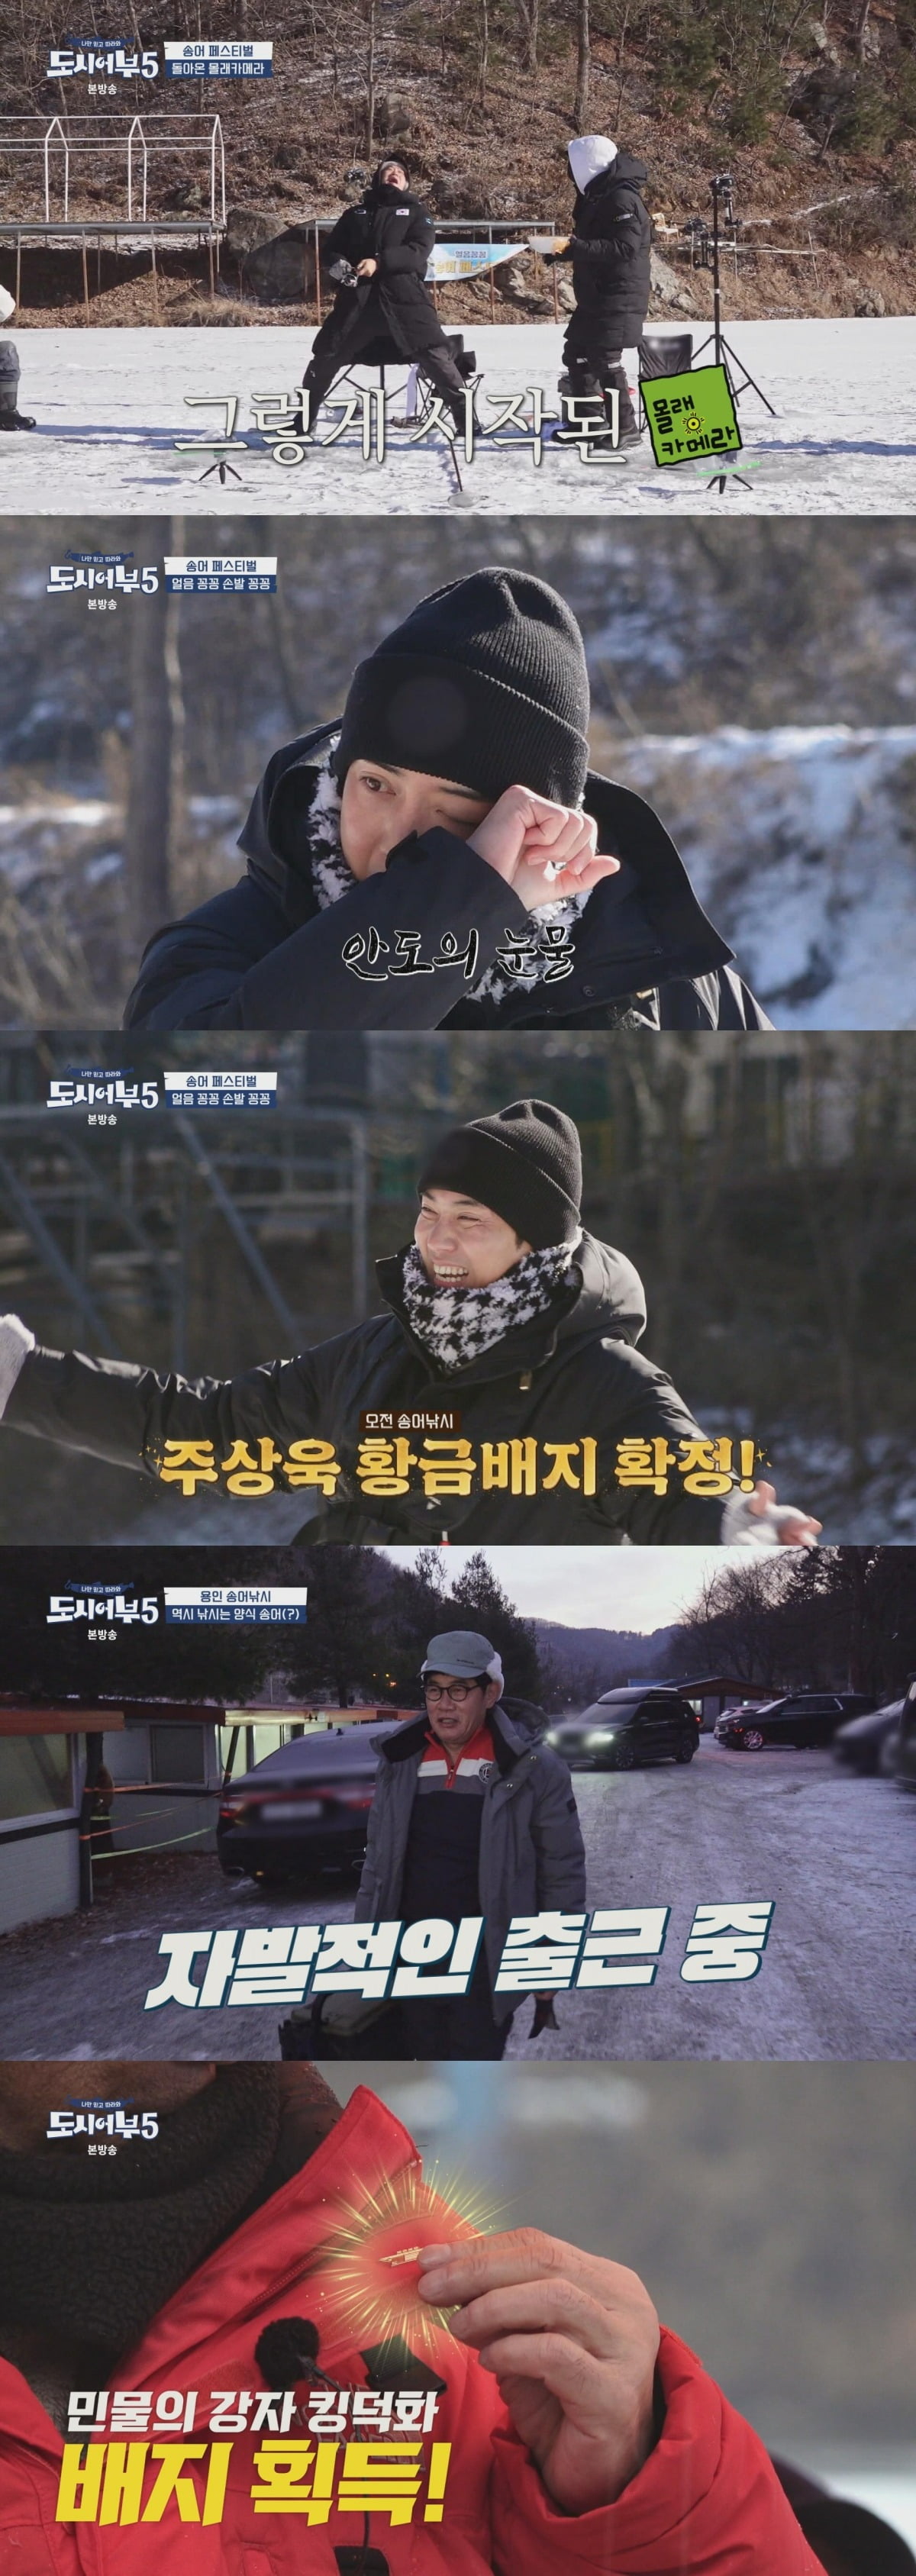 Joo Sang-wook was so sad that he shed tears in the cold weather.